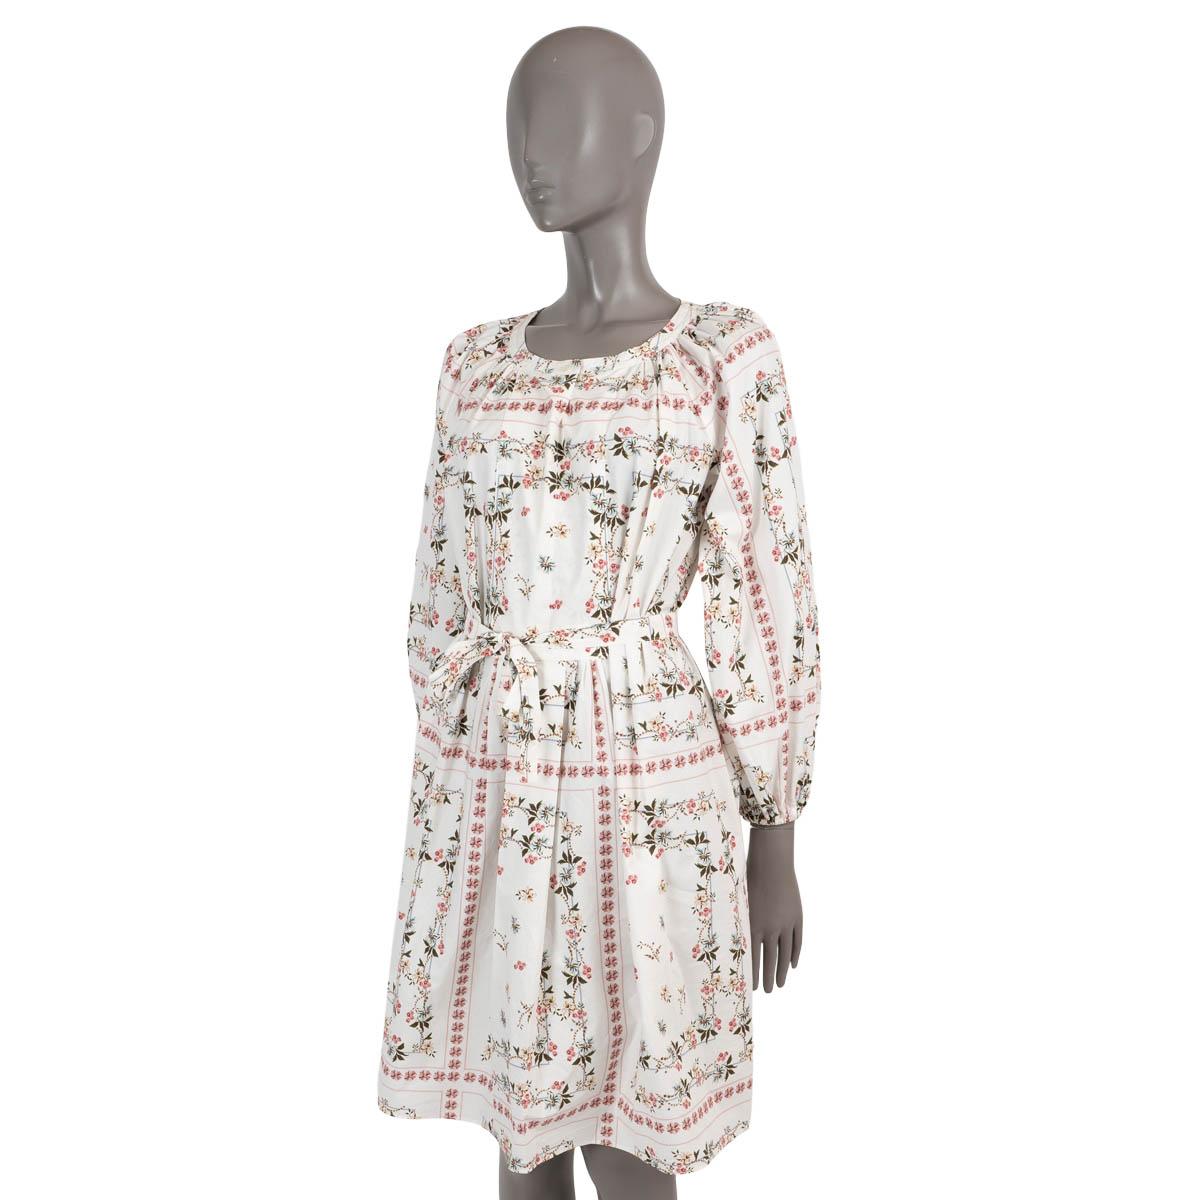 100% authentic Etro floral poplin mini dress in white cotton (100%). Features a belted waist with pleated skirt, 3/4 blouson sleeves and side slit pockets. Closes with buttons on the front. Unlined. Has been worn and is in excellent condition.

2021